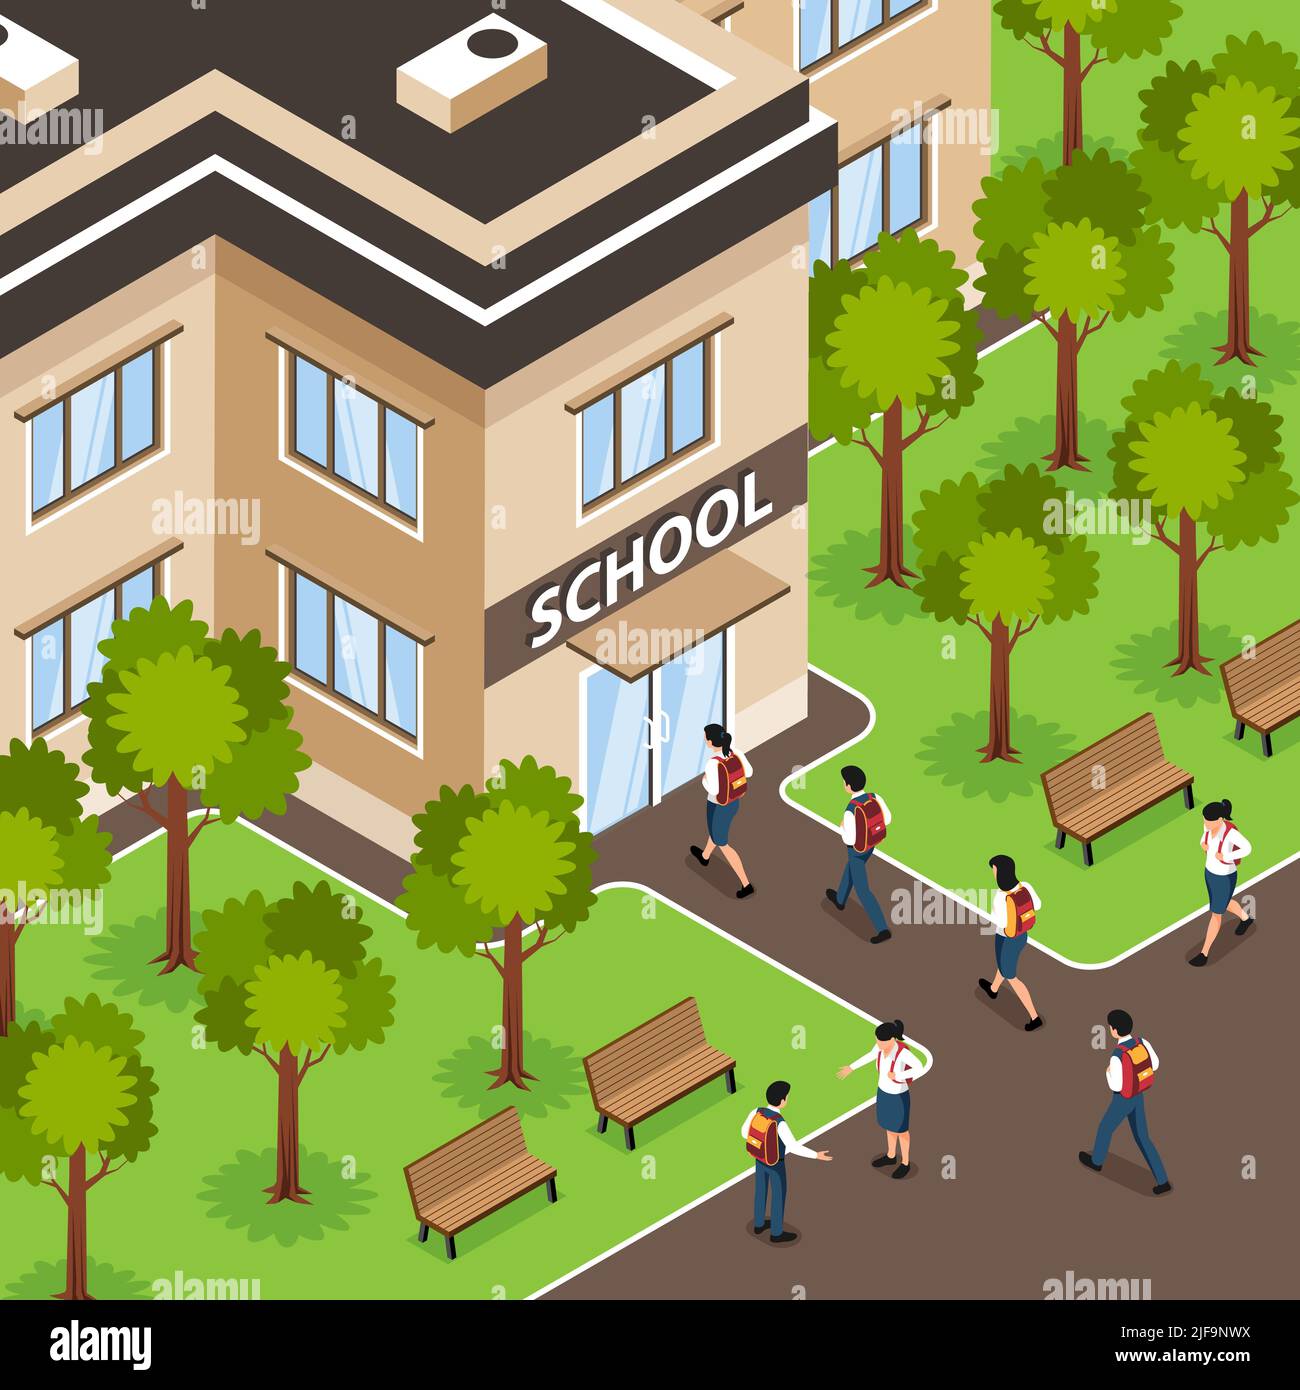 Isometric school composition with outdoor scenery and building facade with entrance and walking pupils with backpacks vector illustration Stock Vector